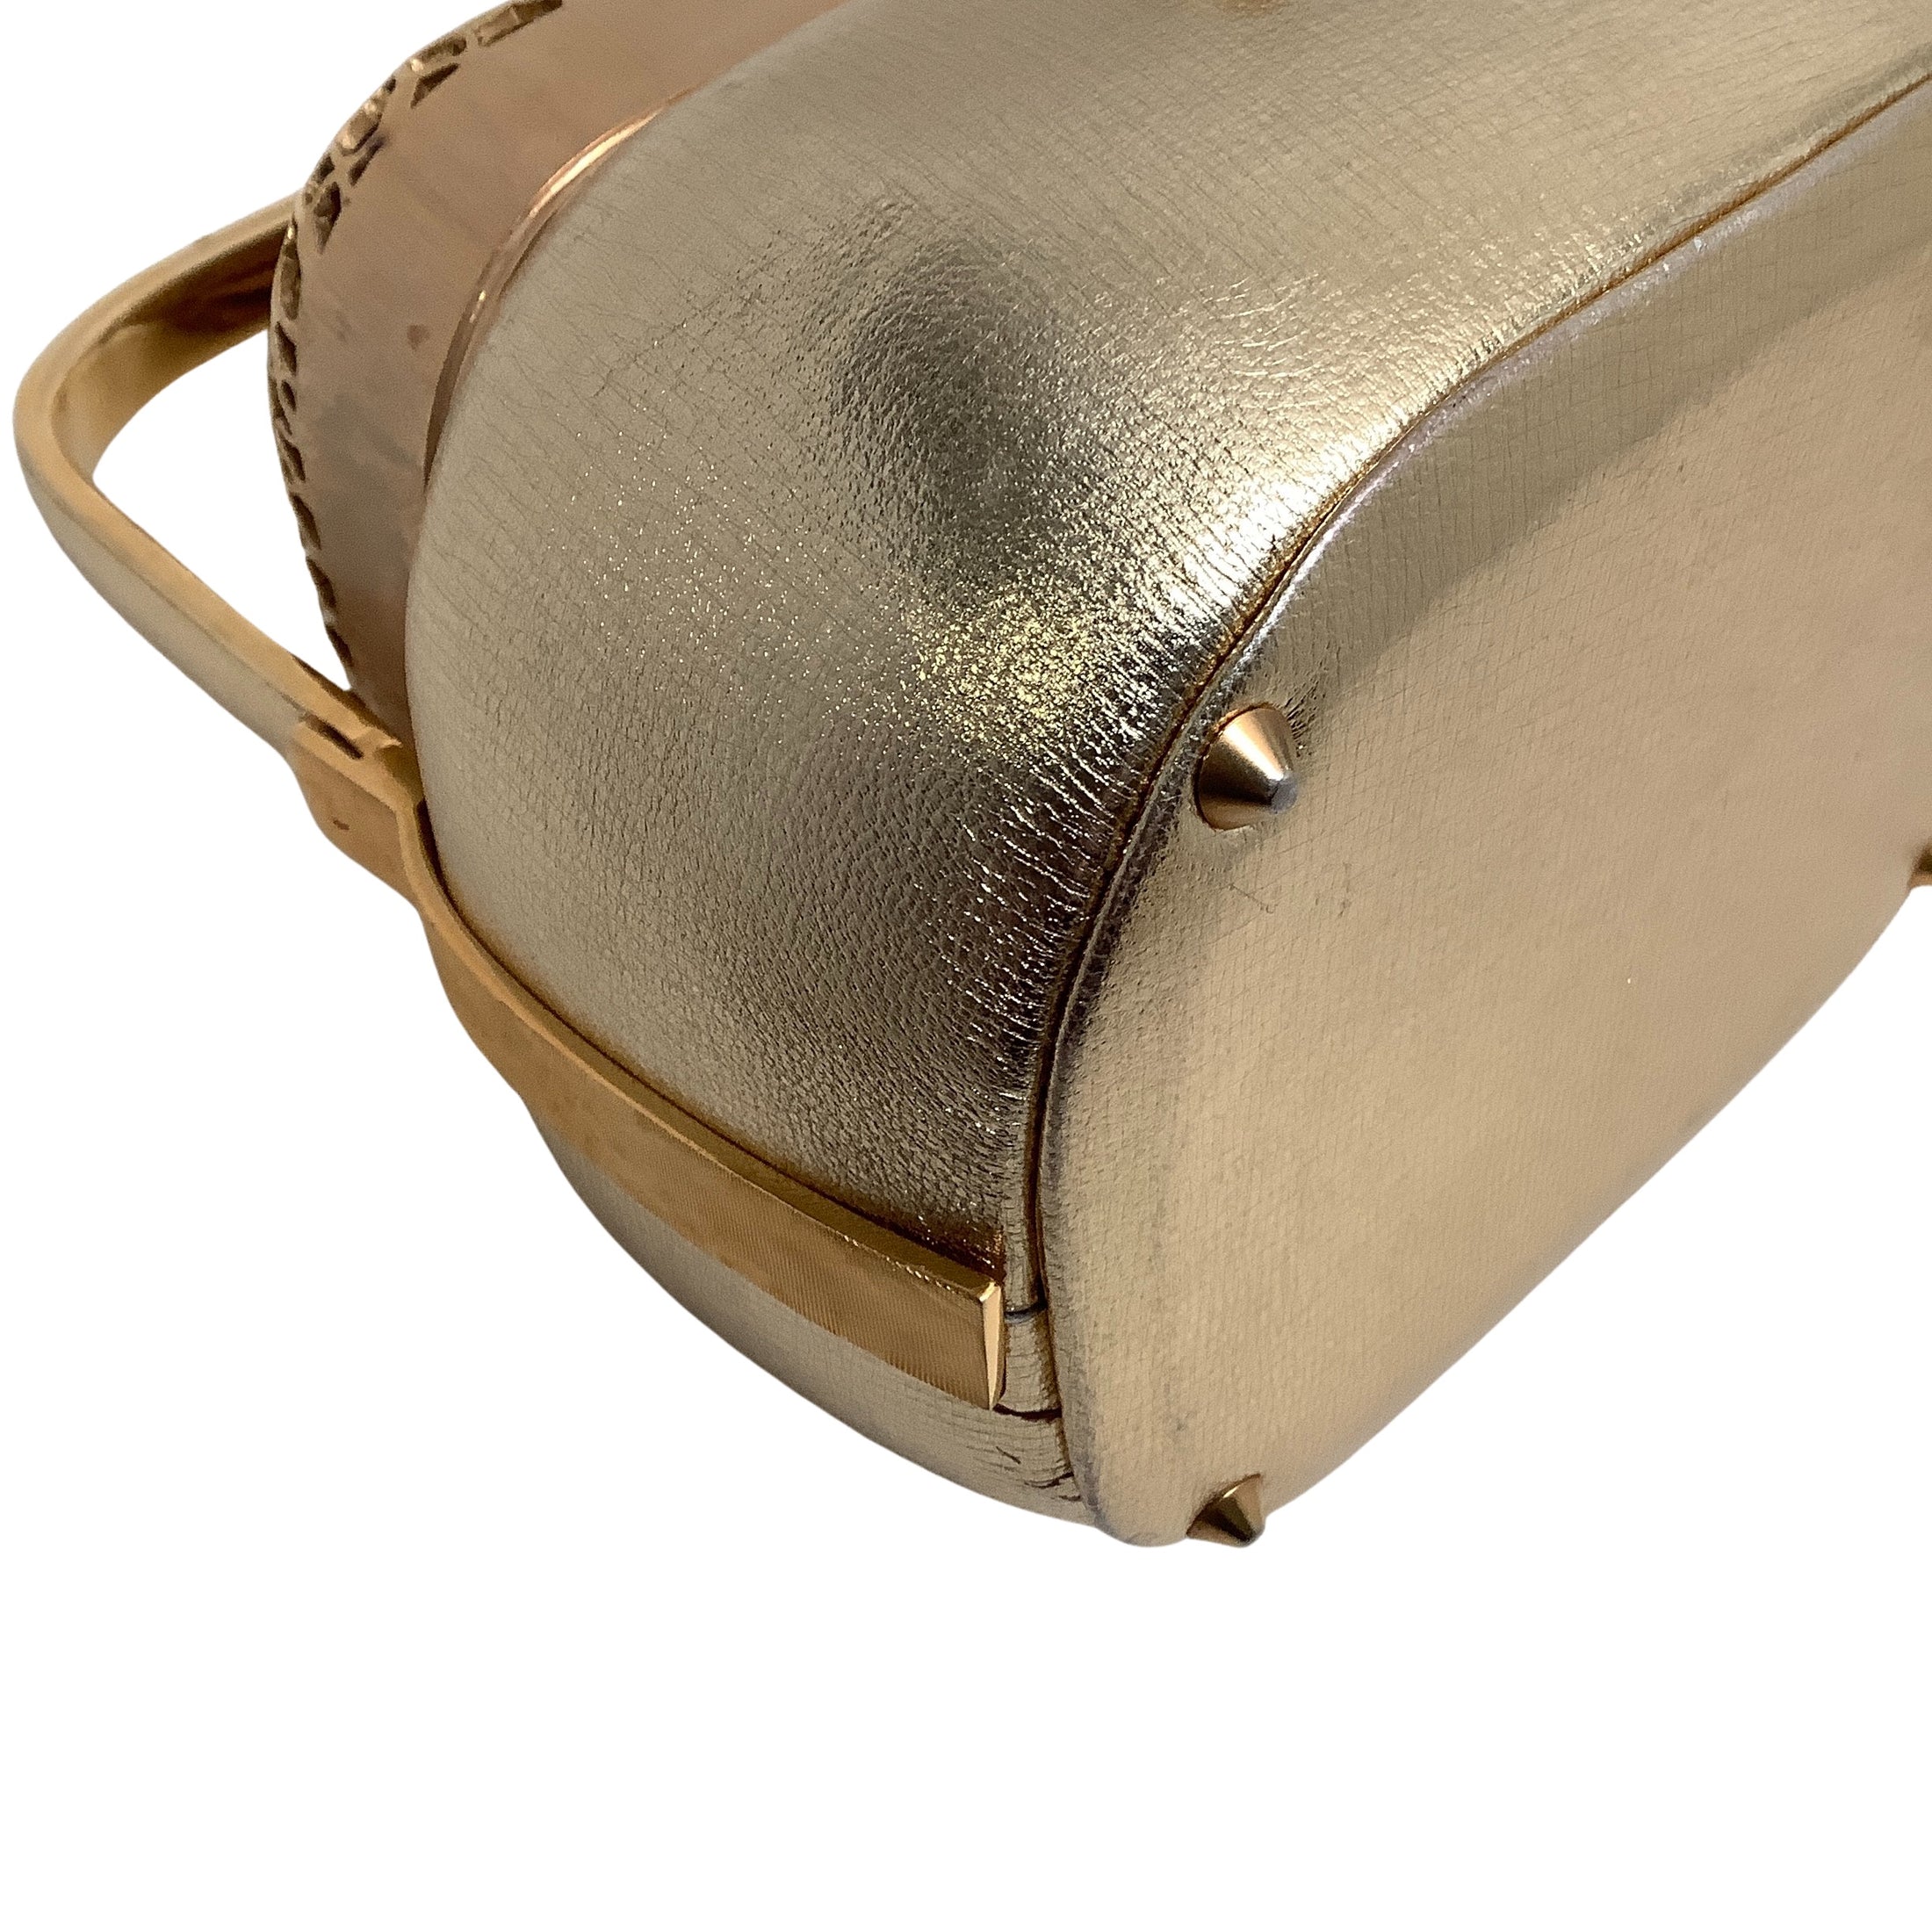 Judith Leiber Vintage Gold Leather Evening Bag with Metal Mesh Top